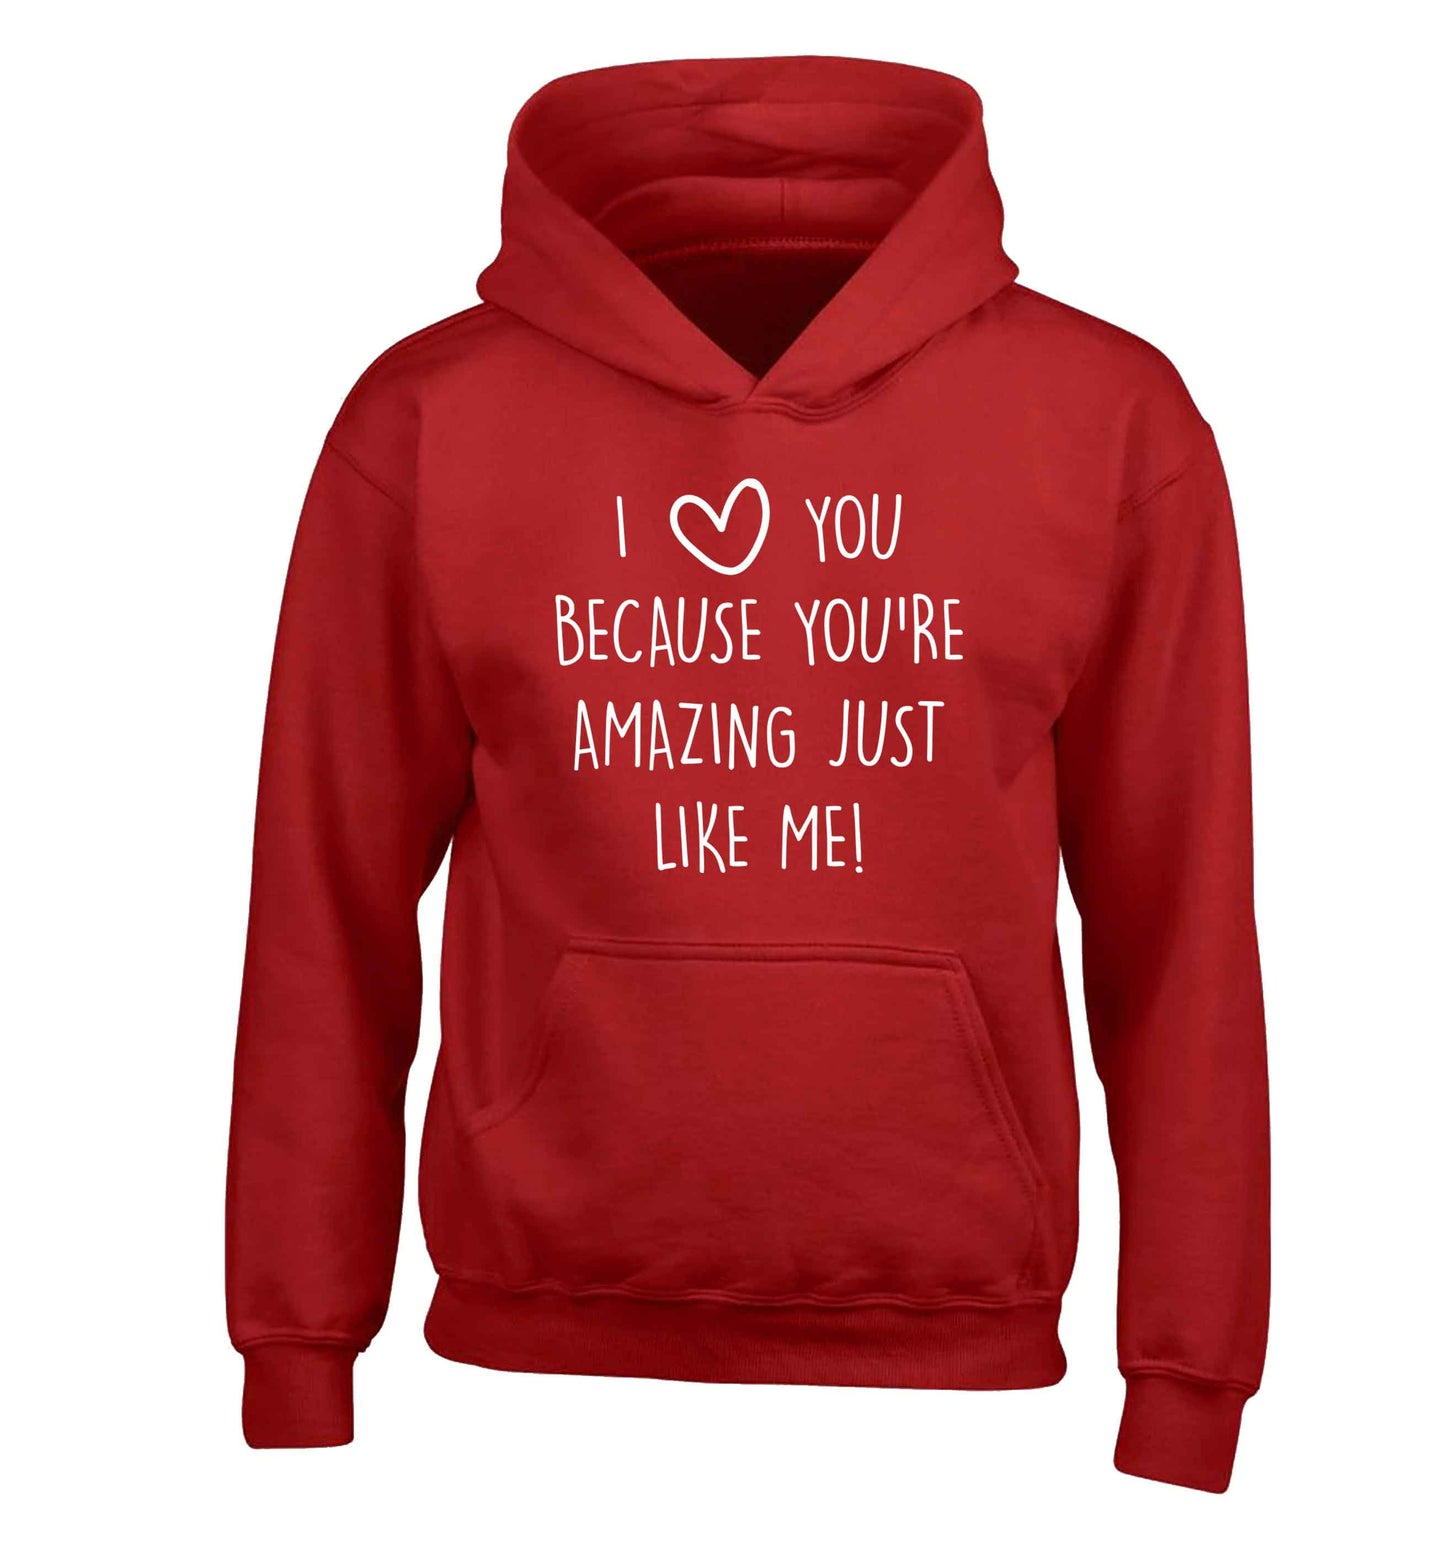 I love you because you're amazing just like me children's red hoodie 12-13 Years